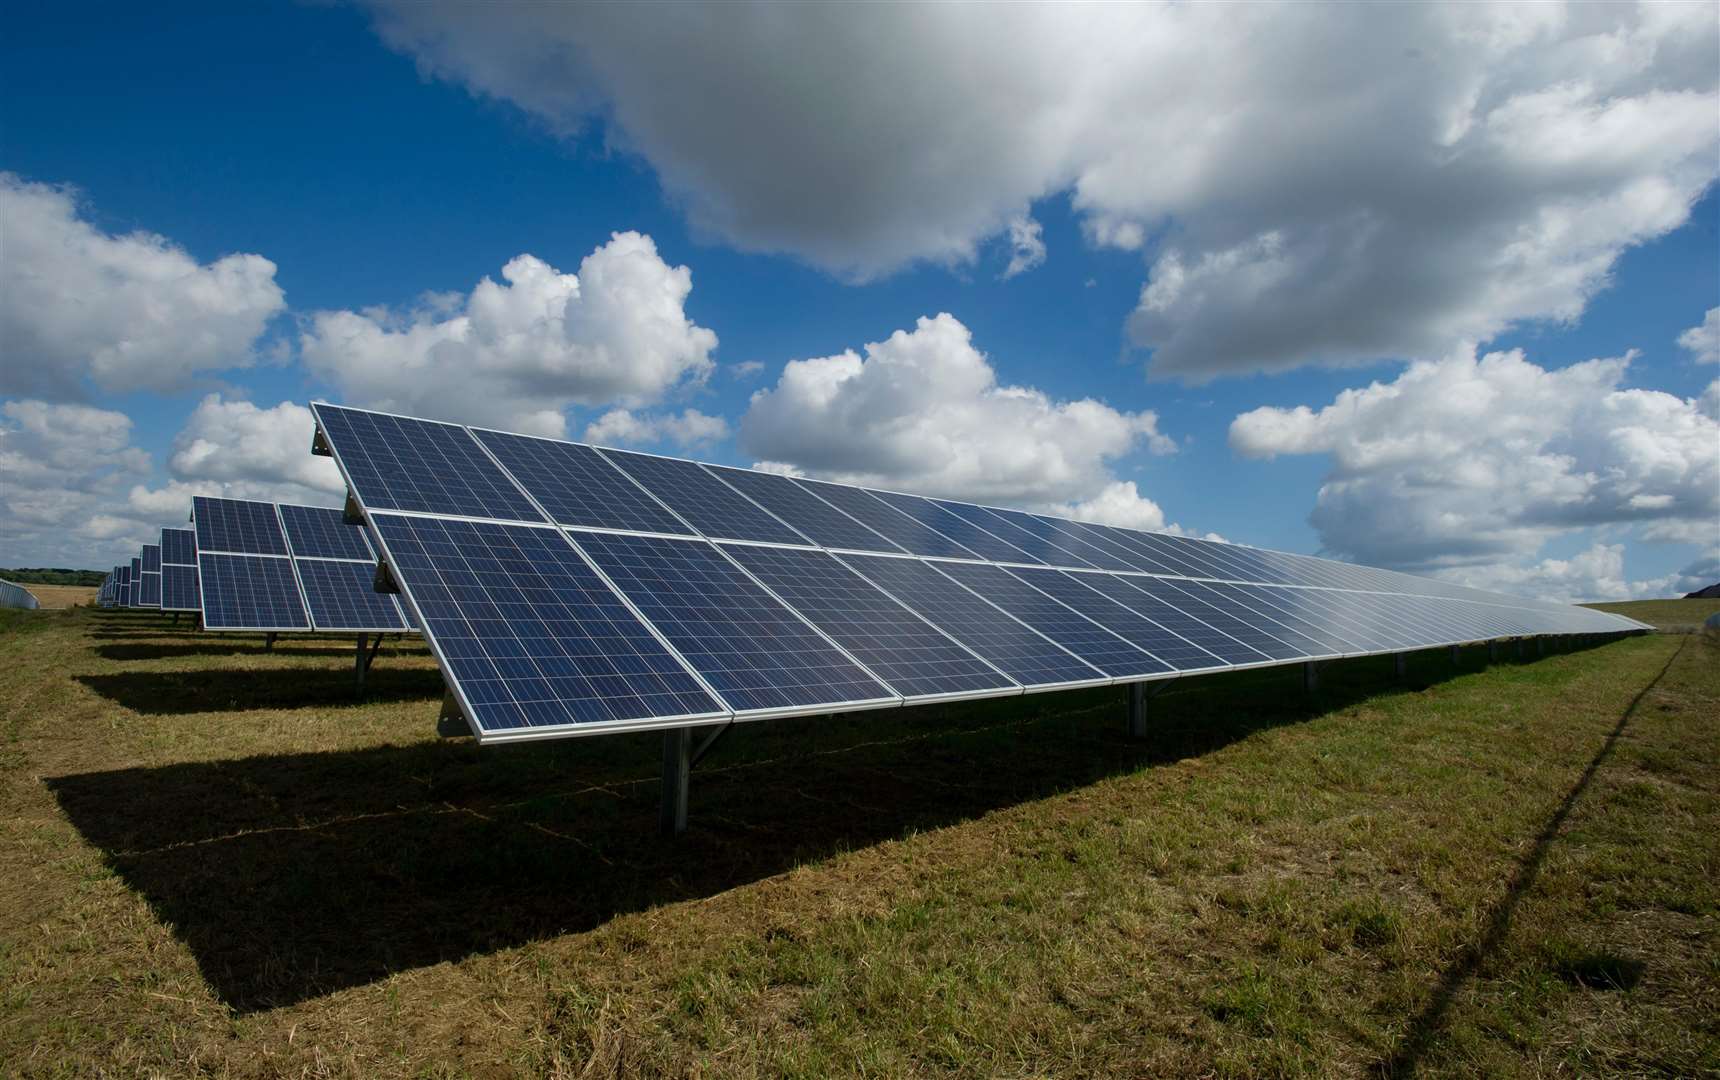 EDF Renewables says only 30% of the site would be covered by the photovoltaic panels